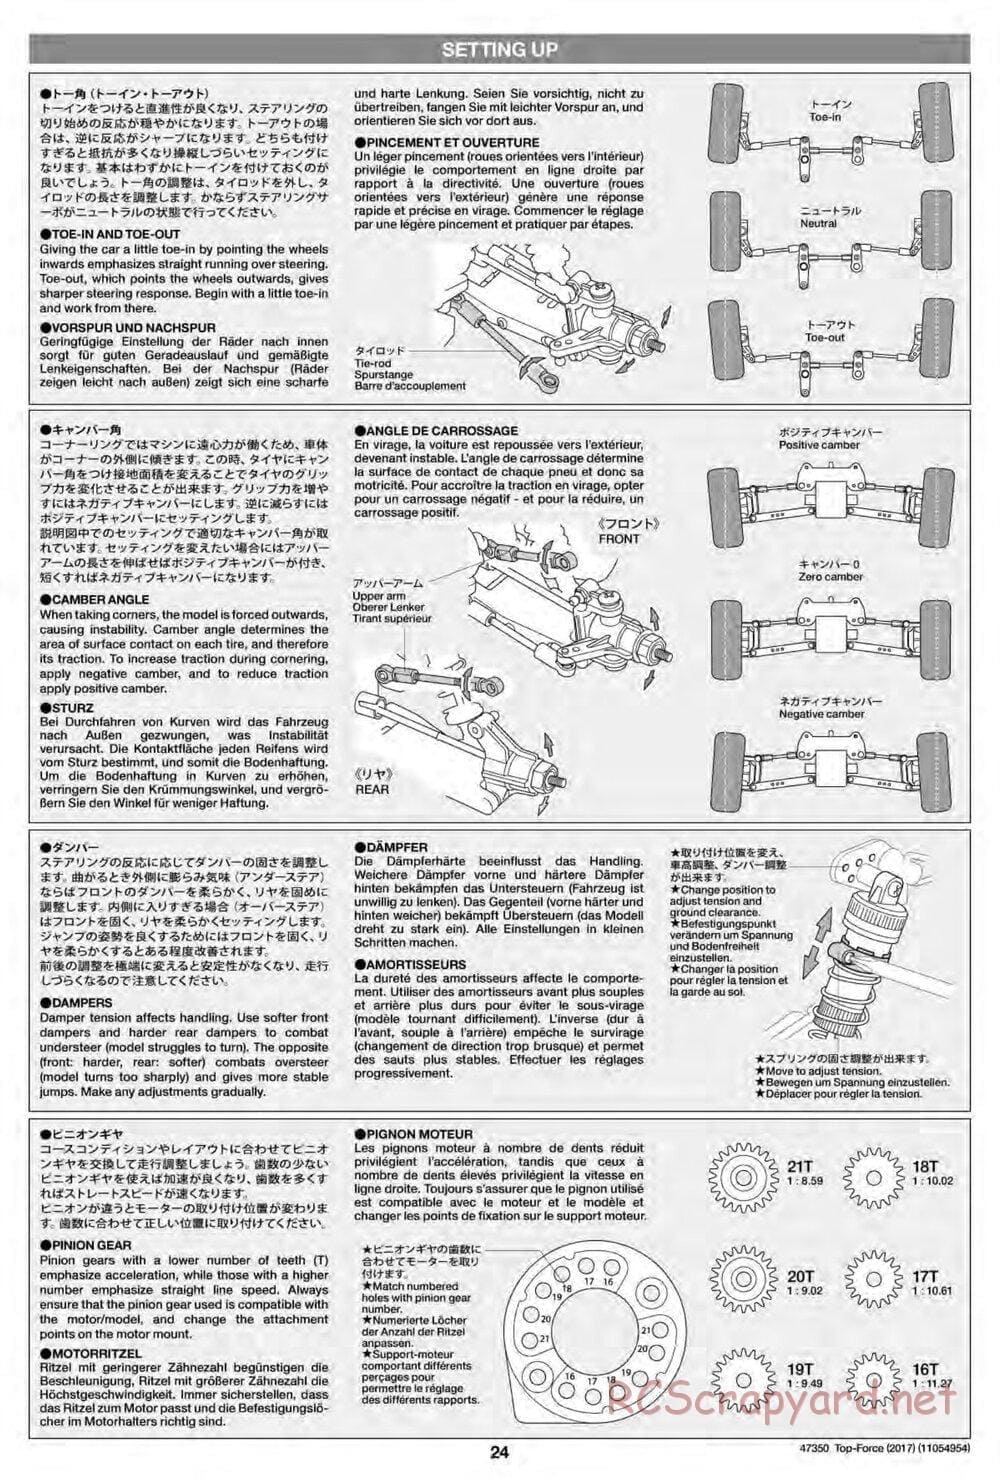 Tamiya - Top Force 2017 - DF-01 Chassis - Manual - Page 24